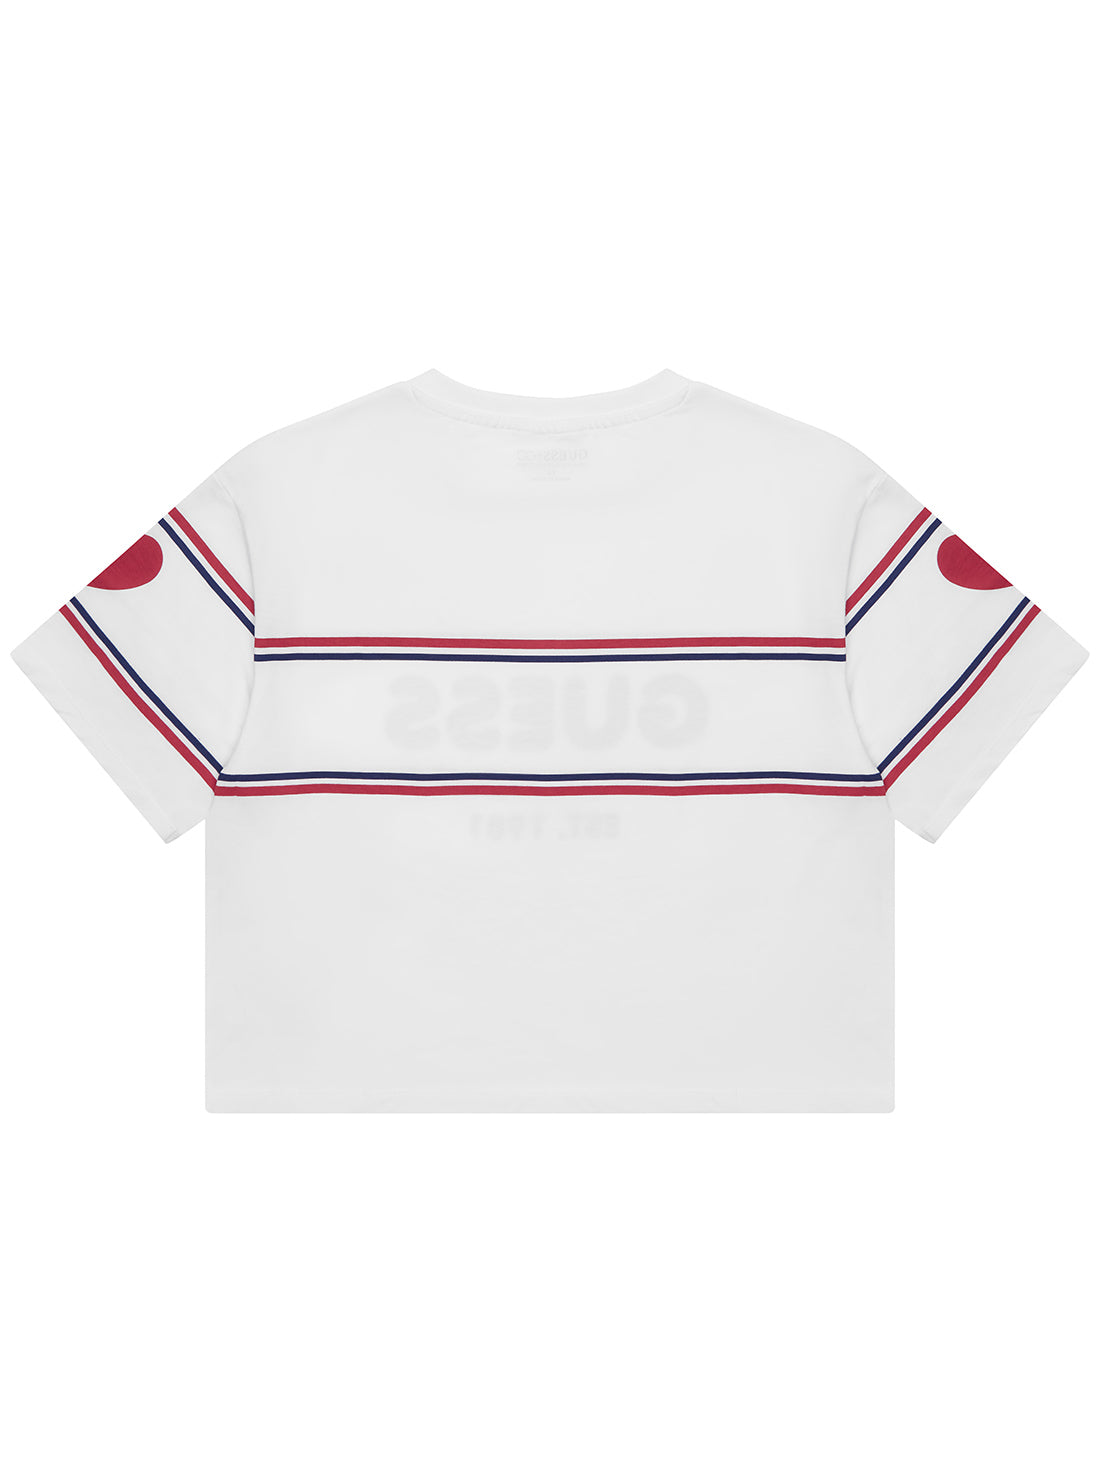 GUESS White Stripe Short Sleeve T-Shirt (7-16) back view